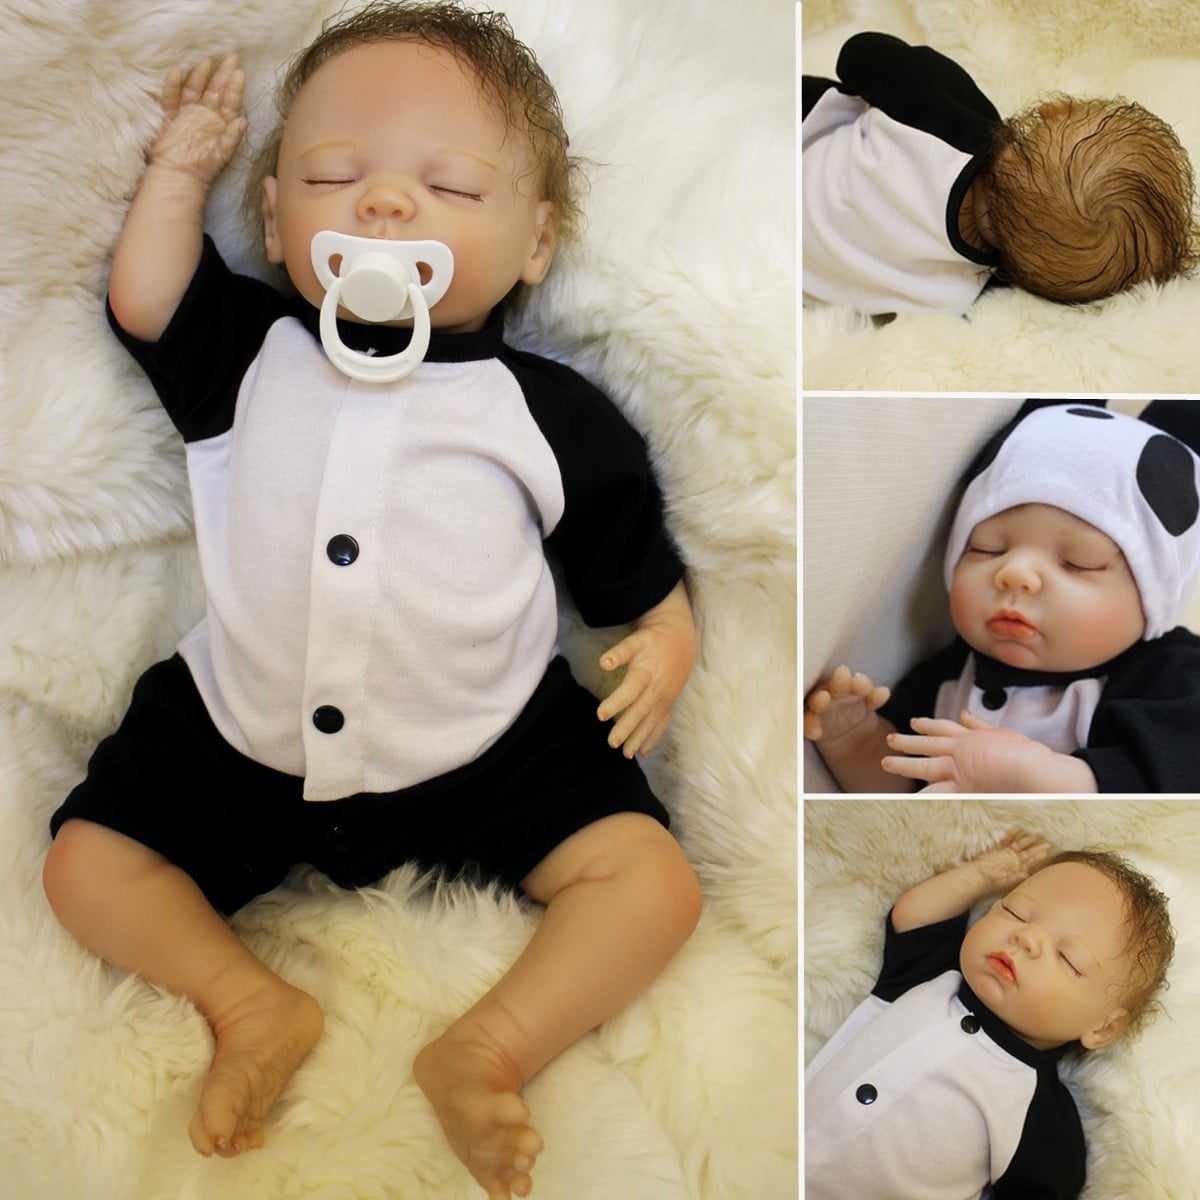 18inch Silicone Reborn Baby Boy Dolls Real Look Doll Realistic New Year Gift Toy